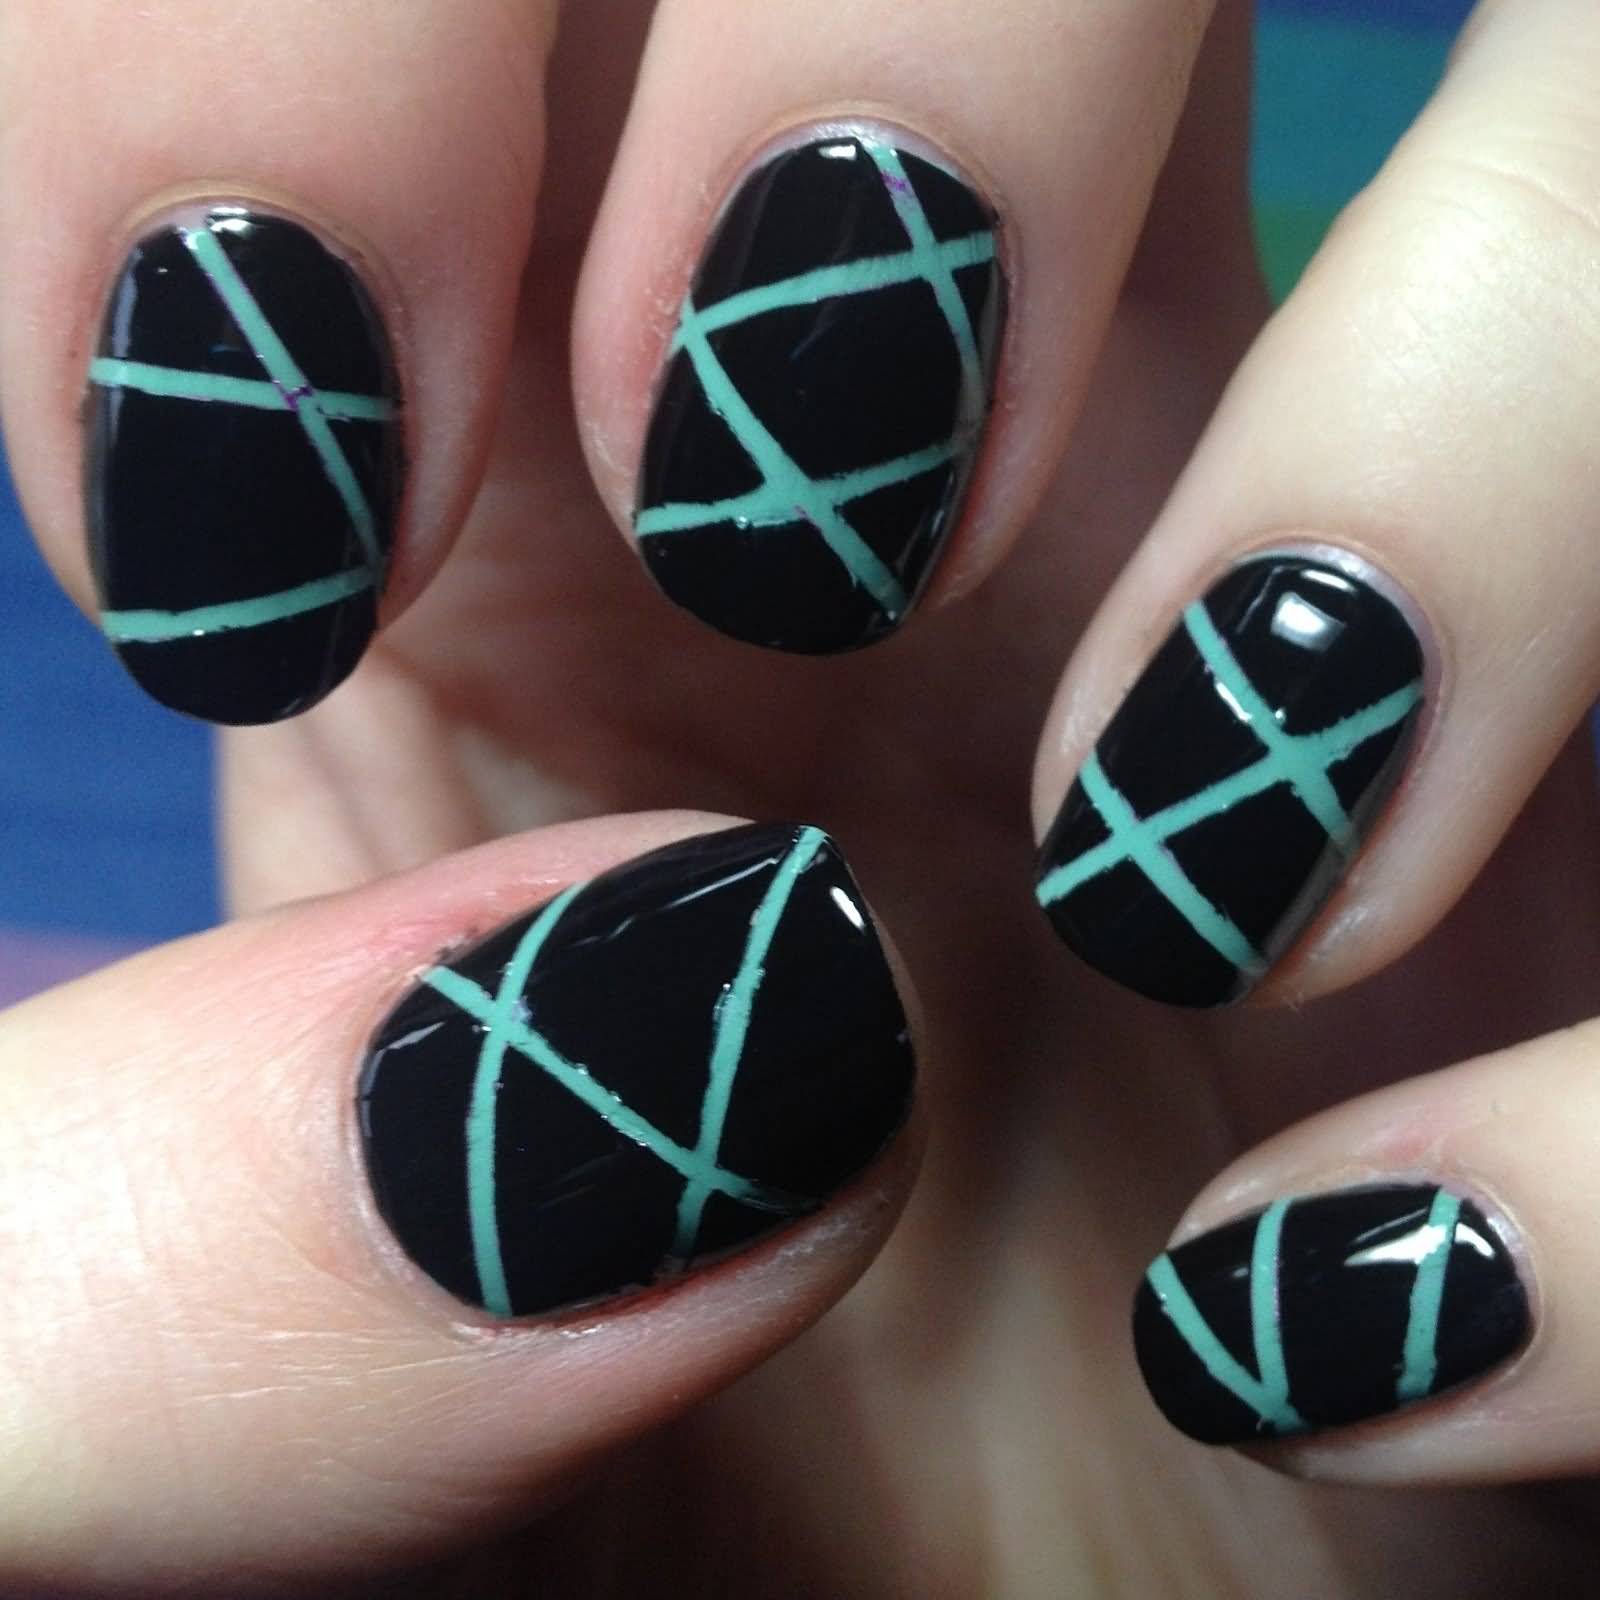 Black Glossy Nails With Blue Stripes Design Nail Art